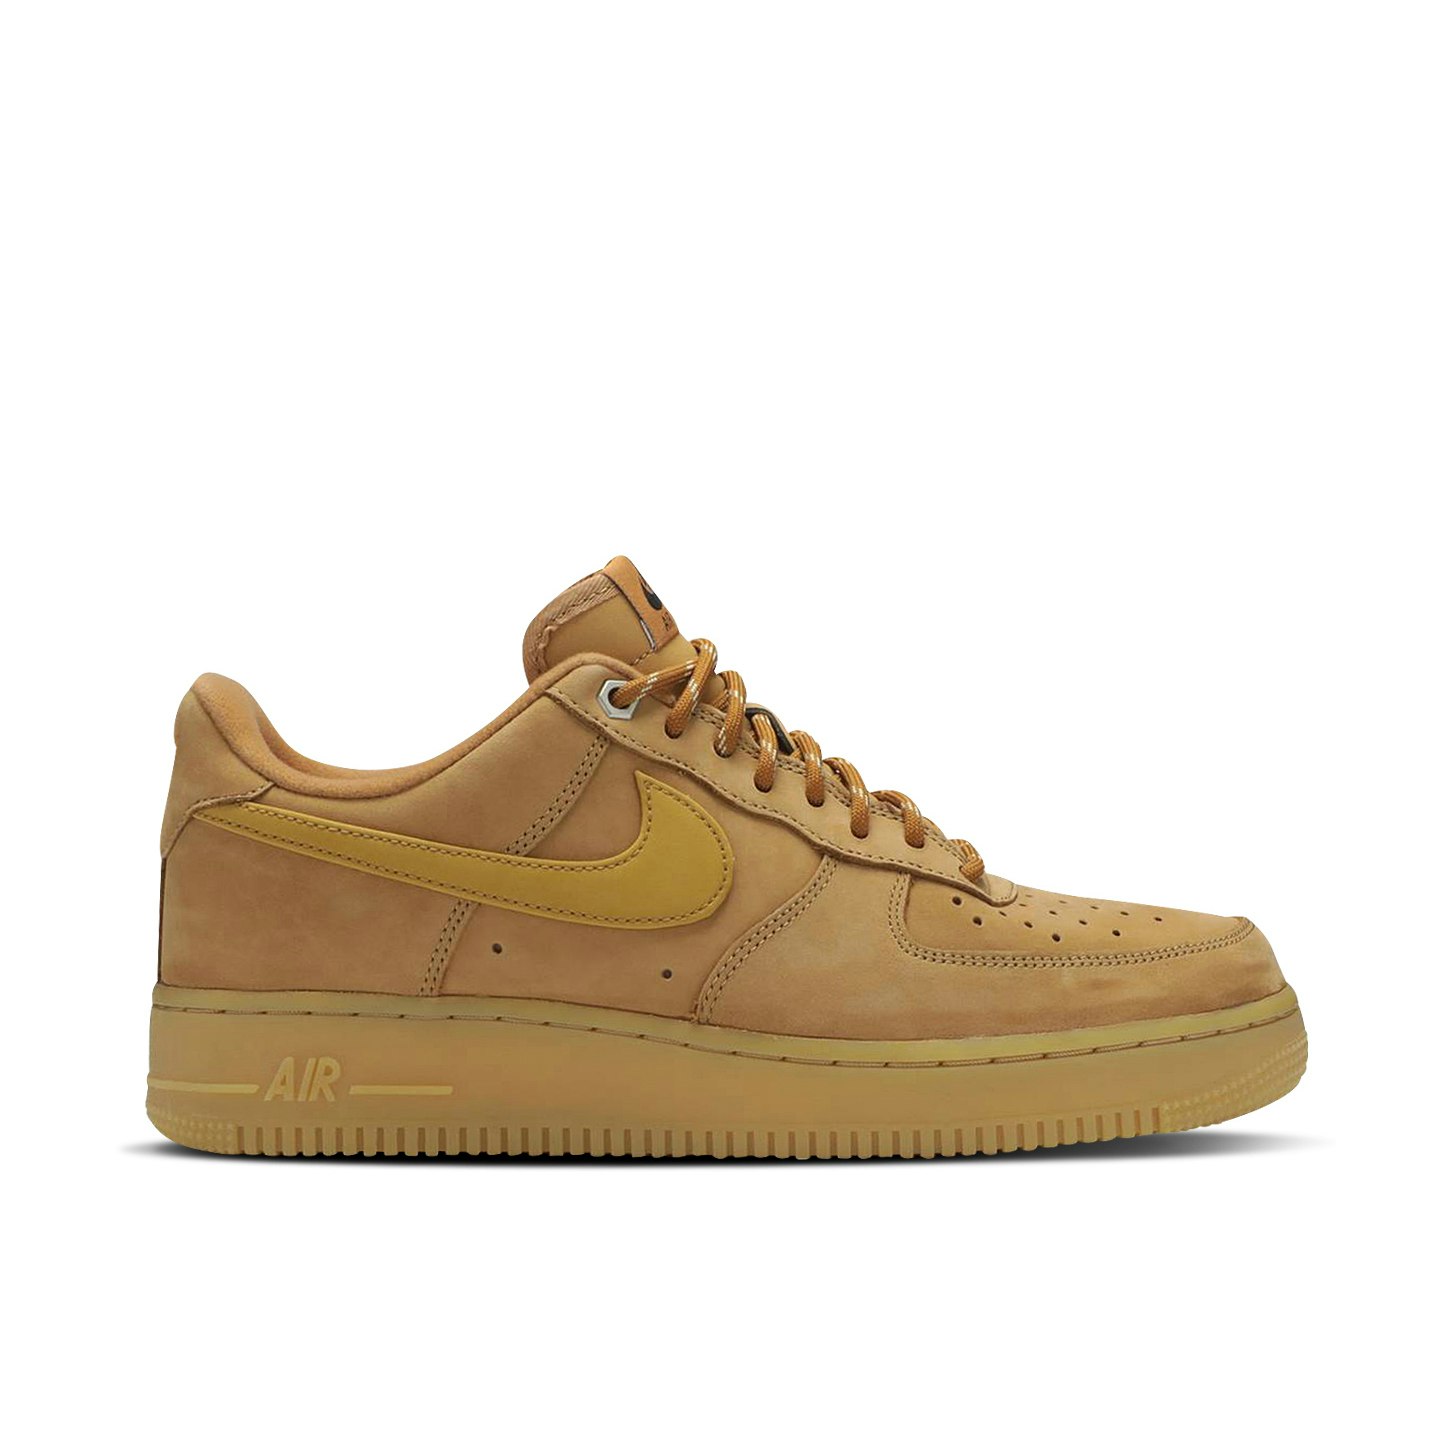 Nike Air Force Low Flax Brown CJ9179-200 Laced